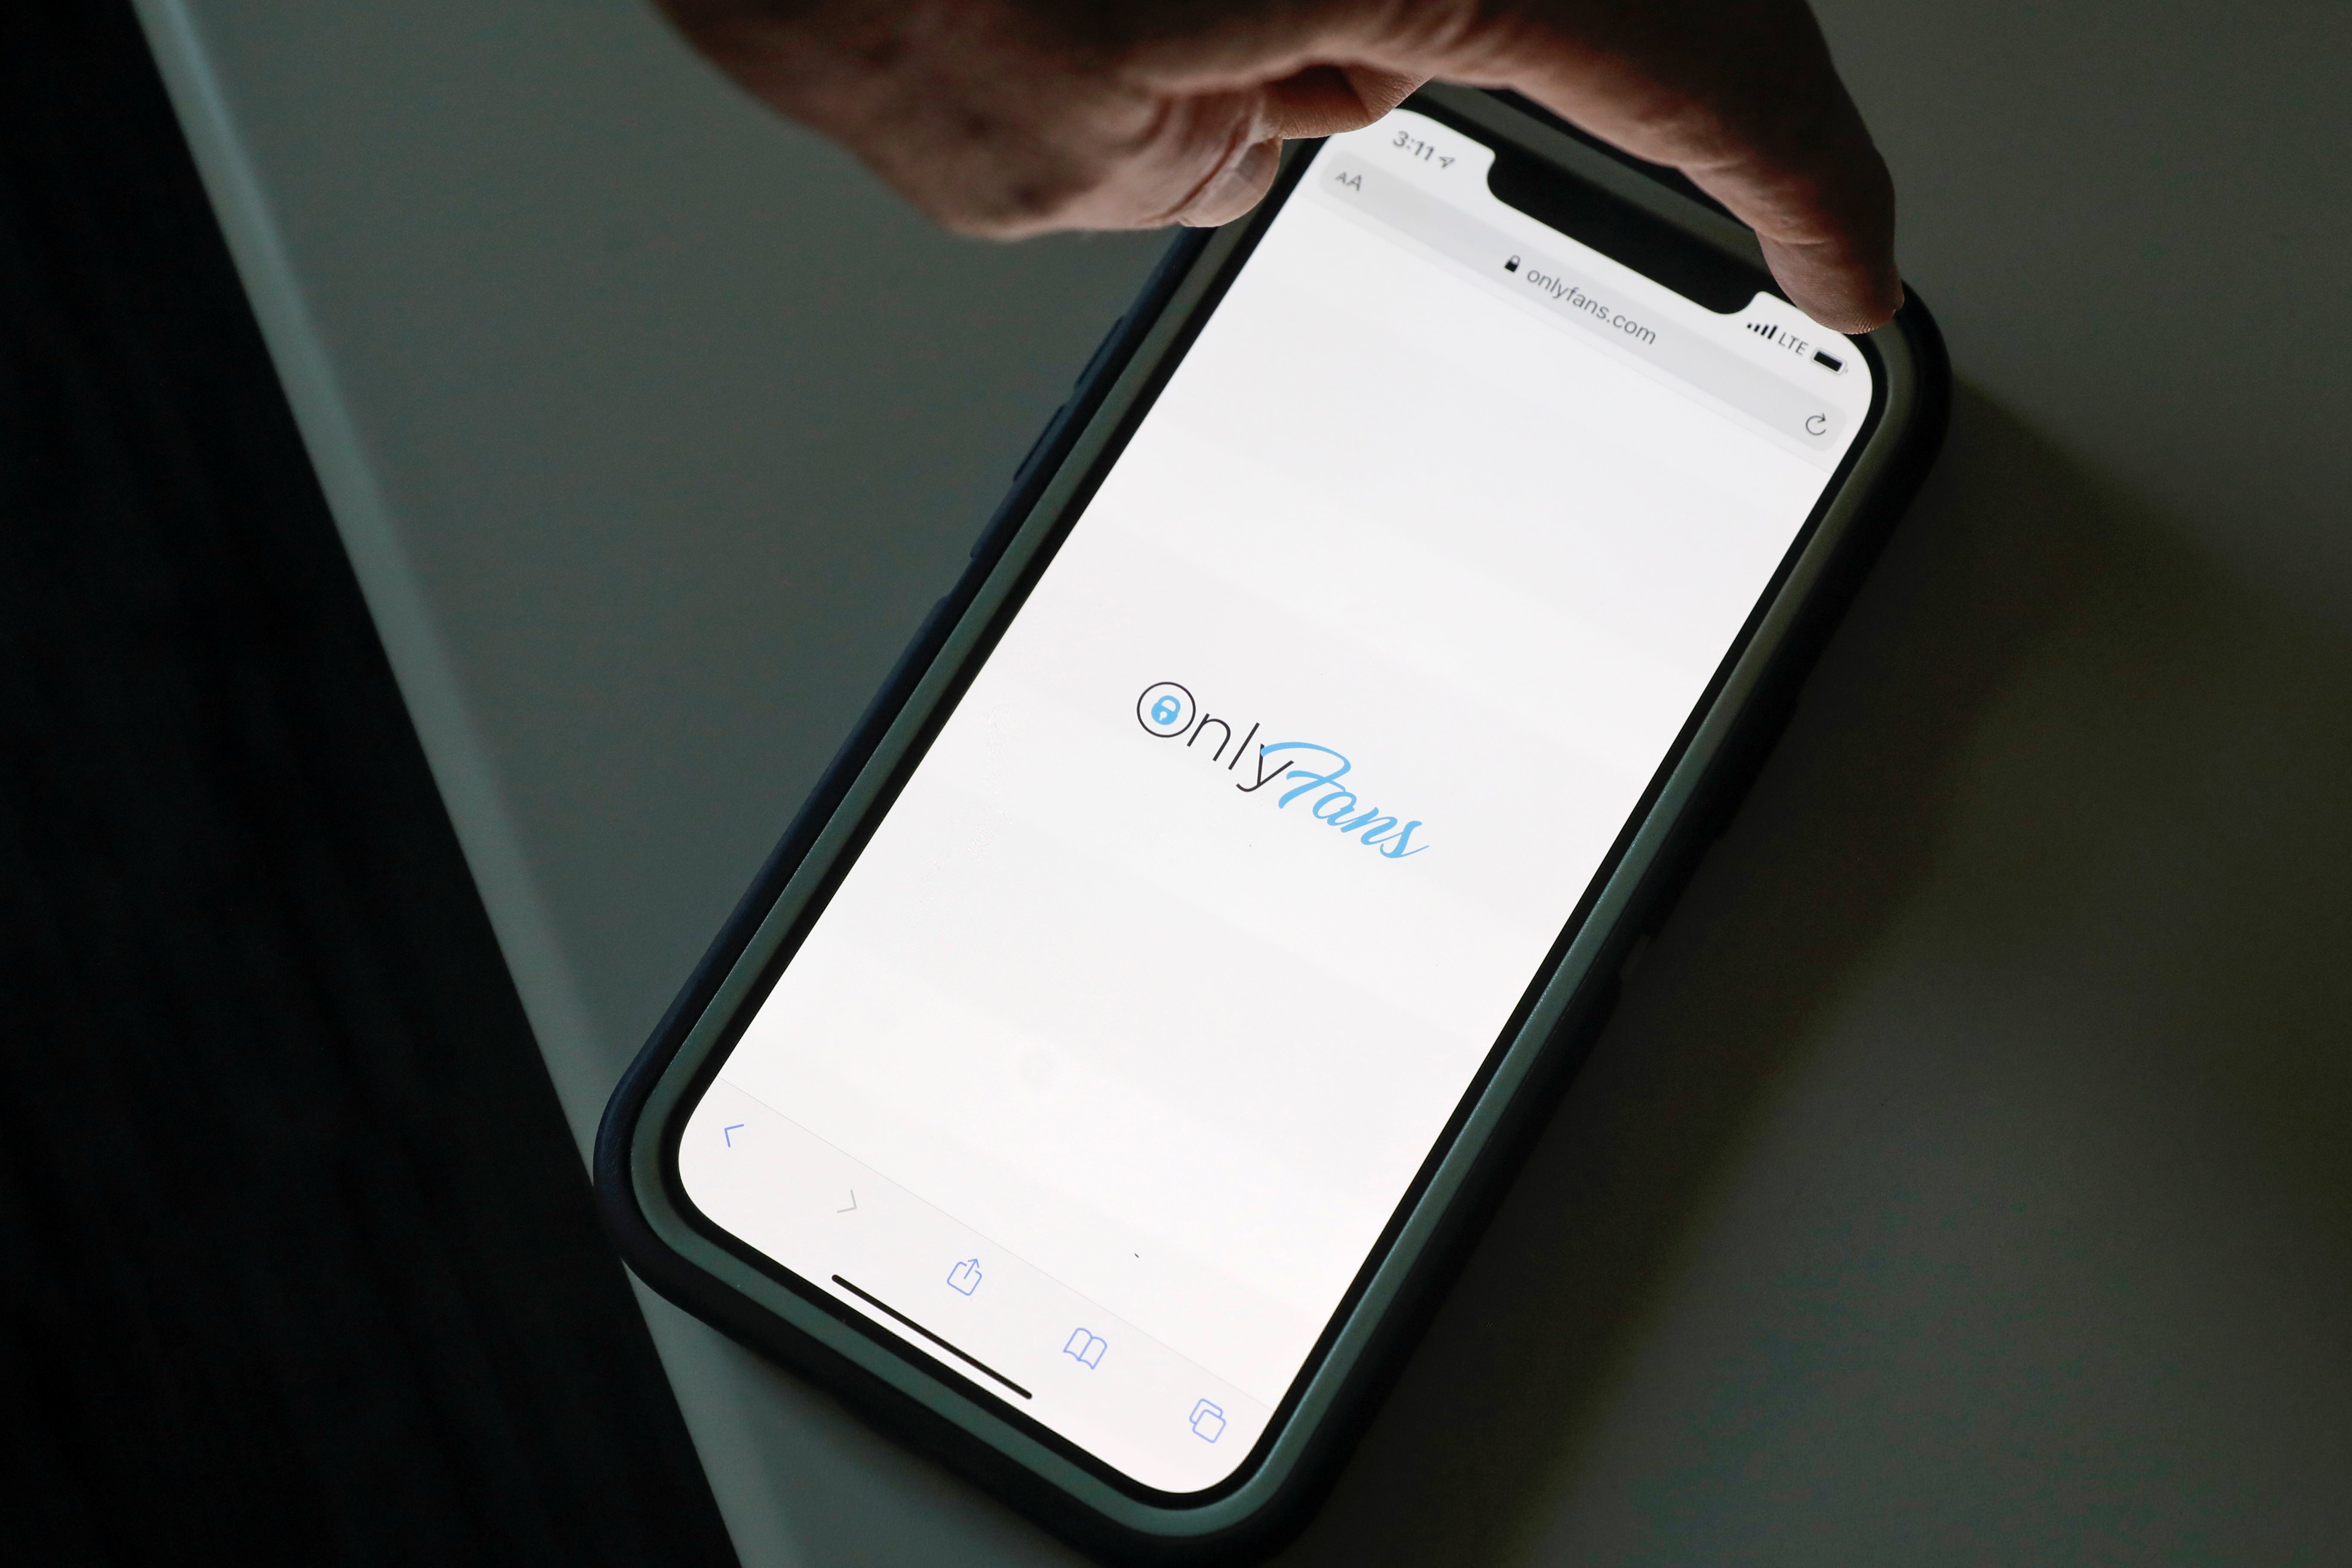 A smartphone with a browser showing the OnlyFans logo.